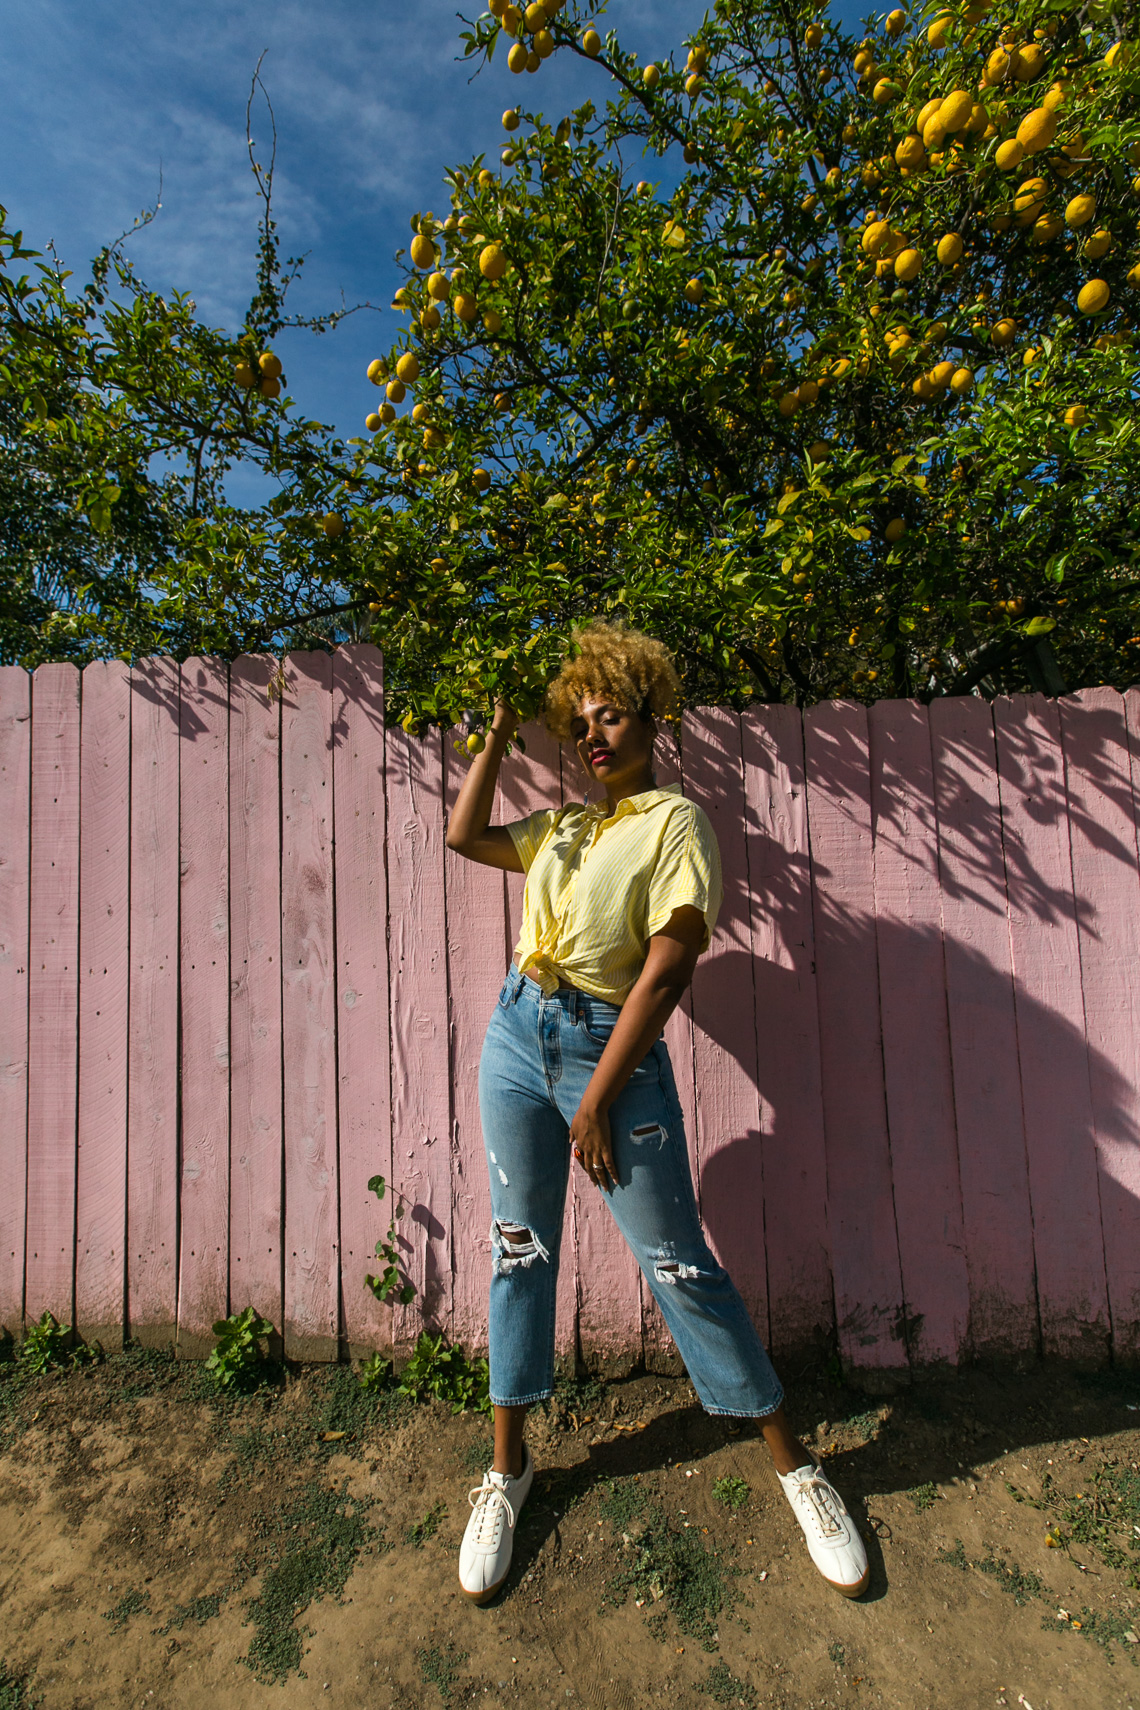 lemon tree-shadow play-yellow shirt-model-wear who you are-h&m shirt-pink fence-levis wedgie fit jeans